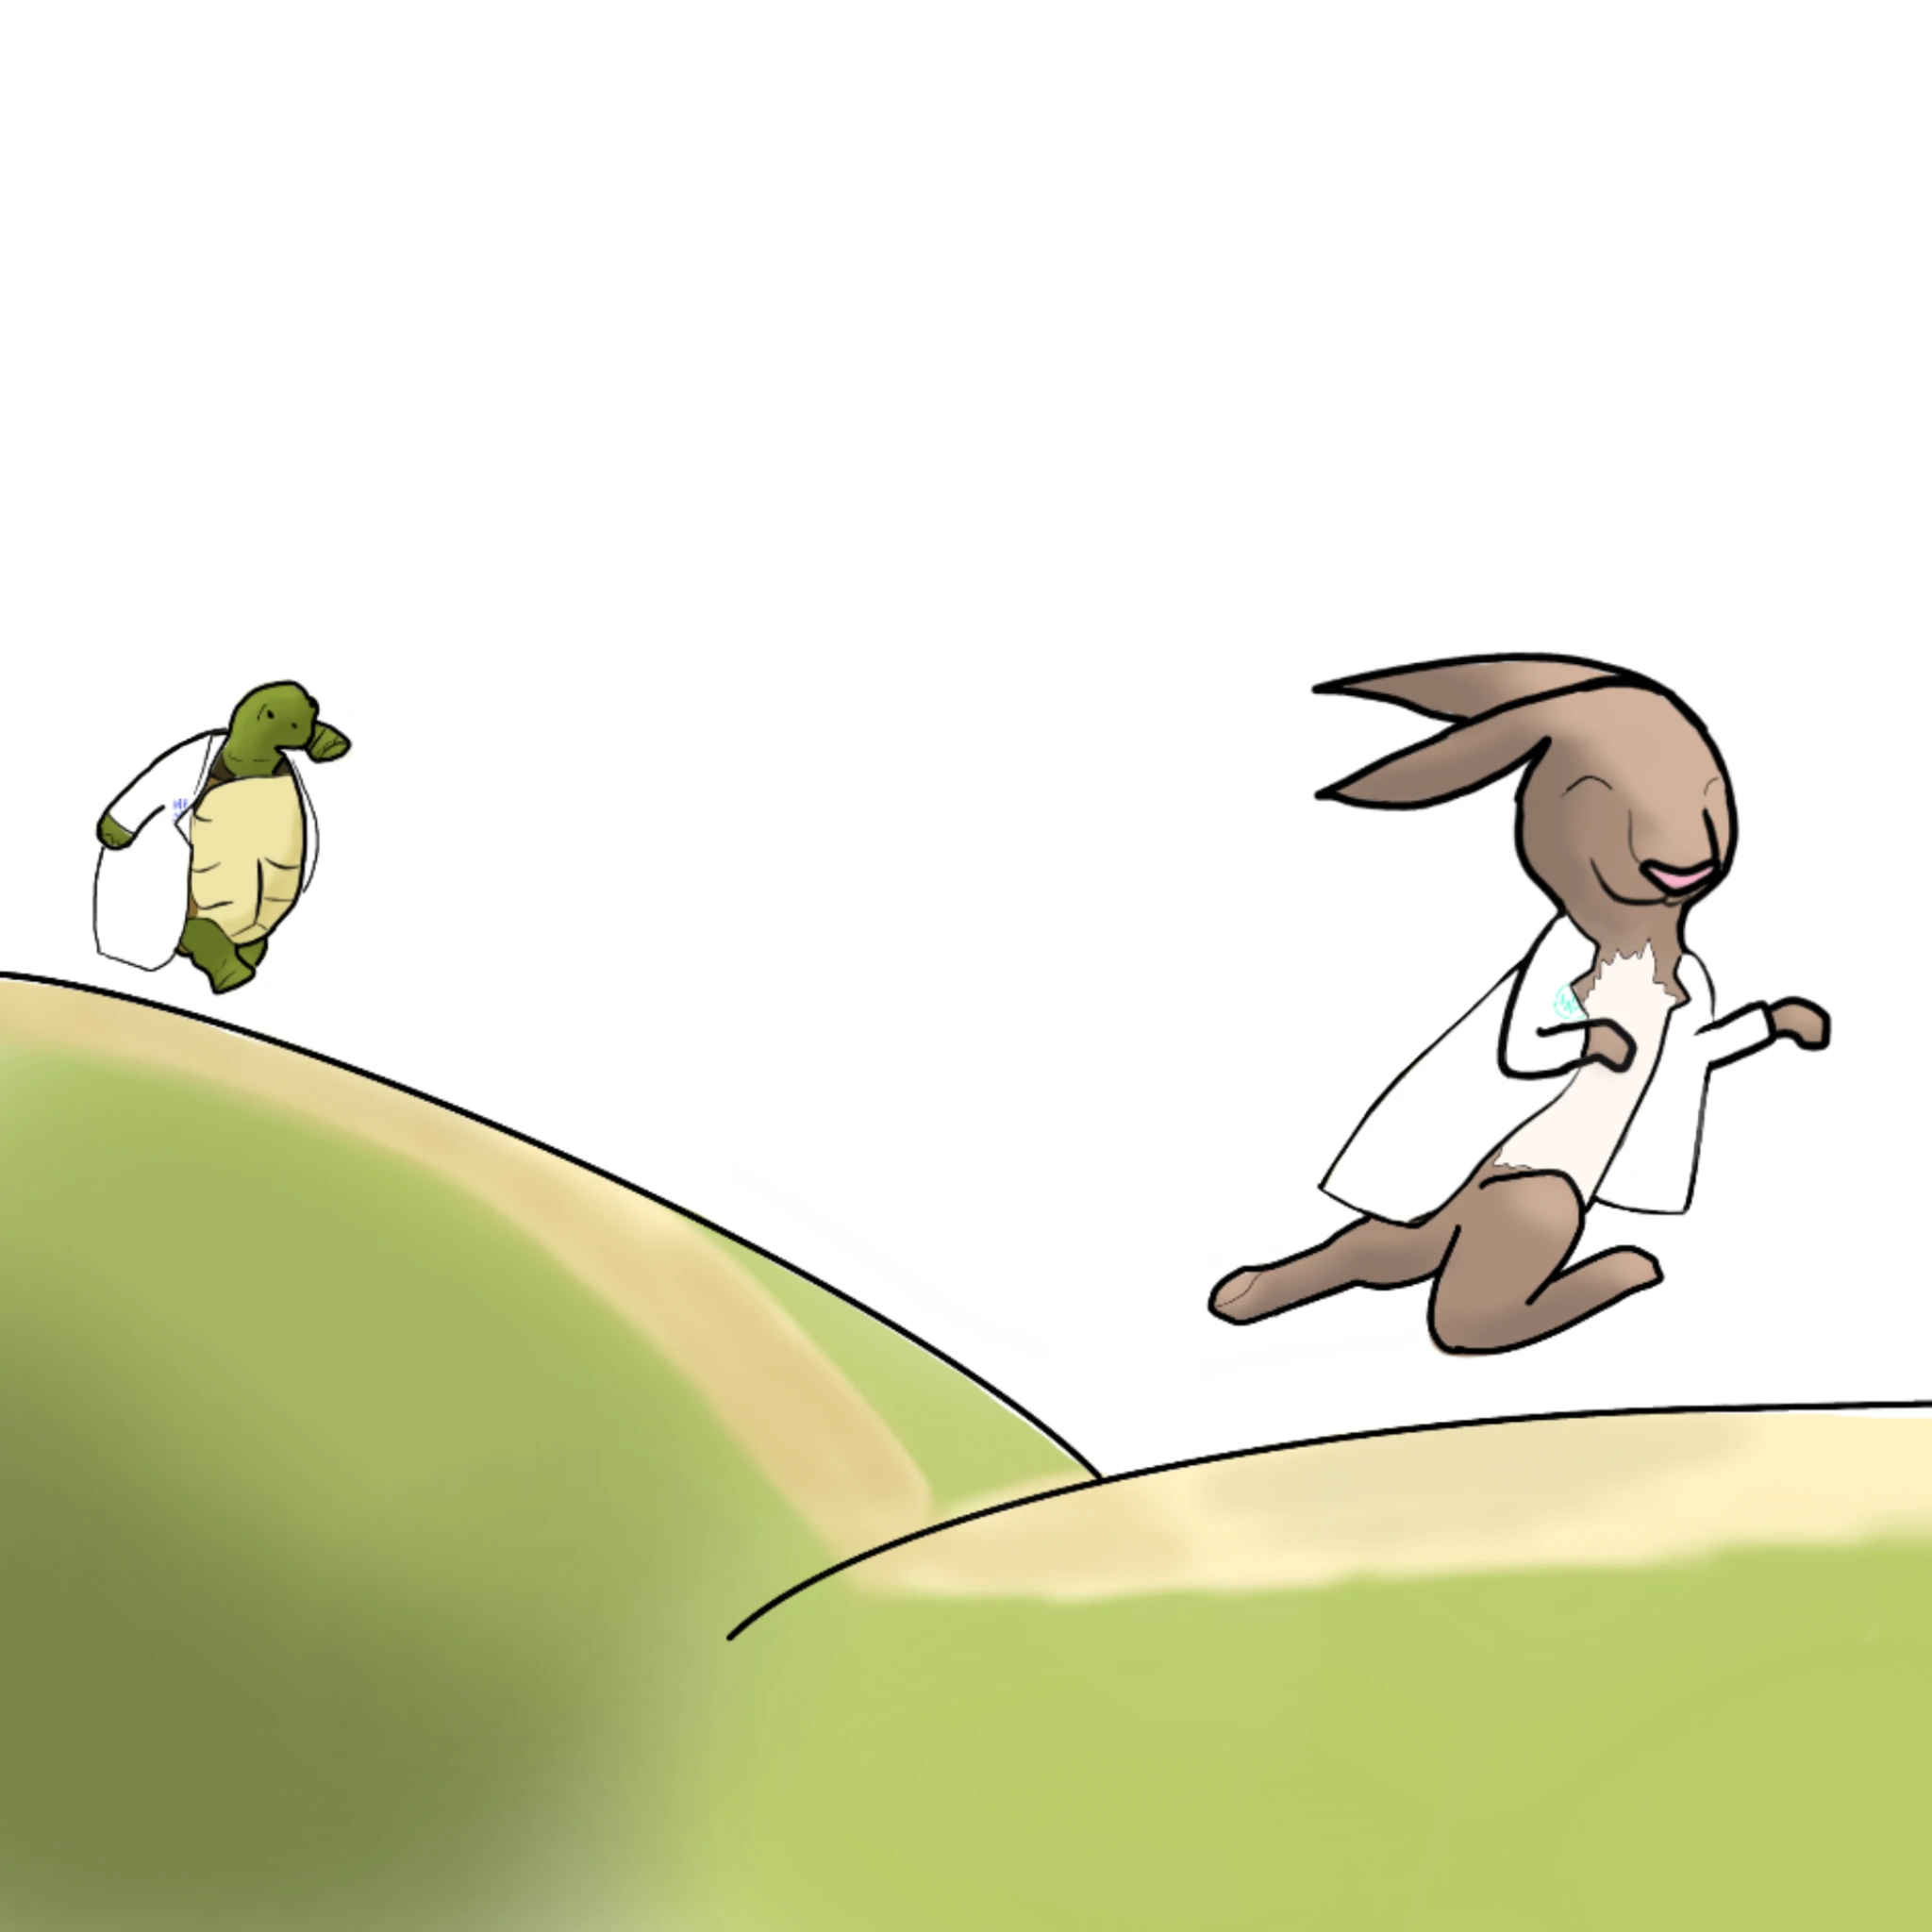 A hare outrunning a tourtise